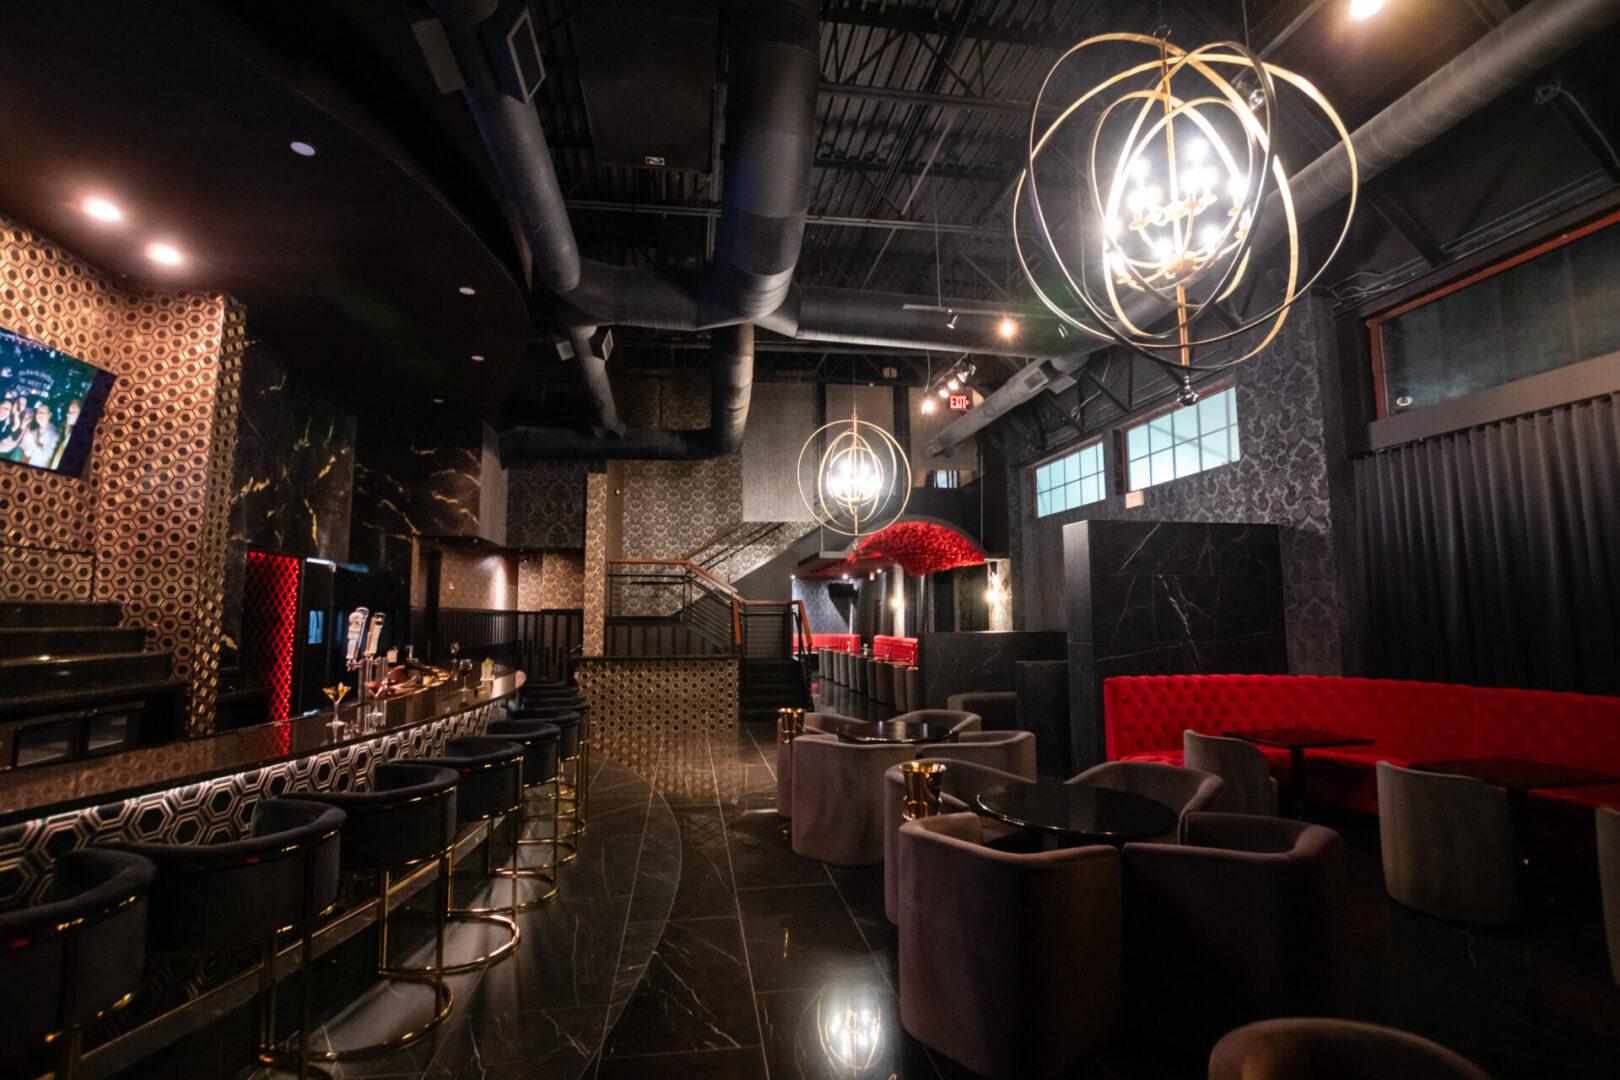 The interior of a luxury lounge in black and red.